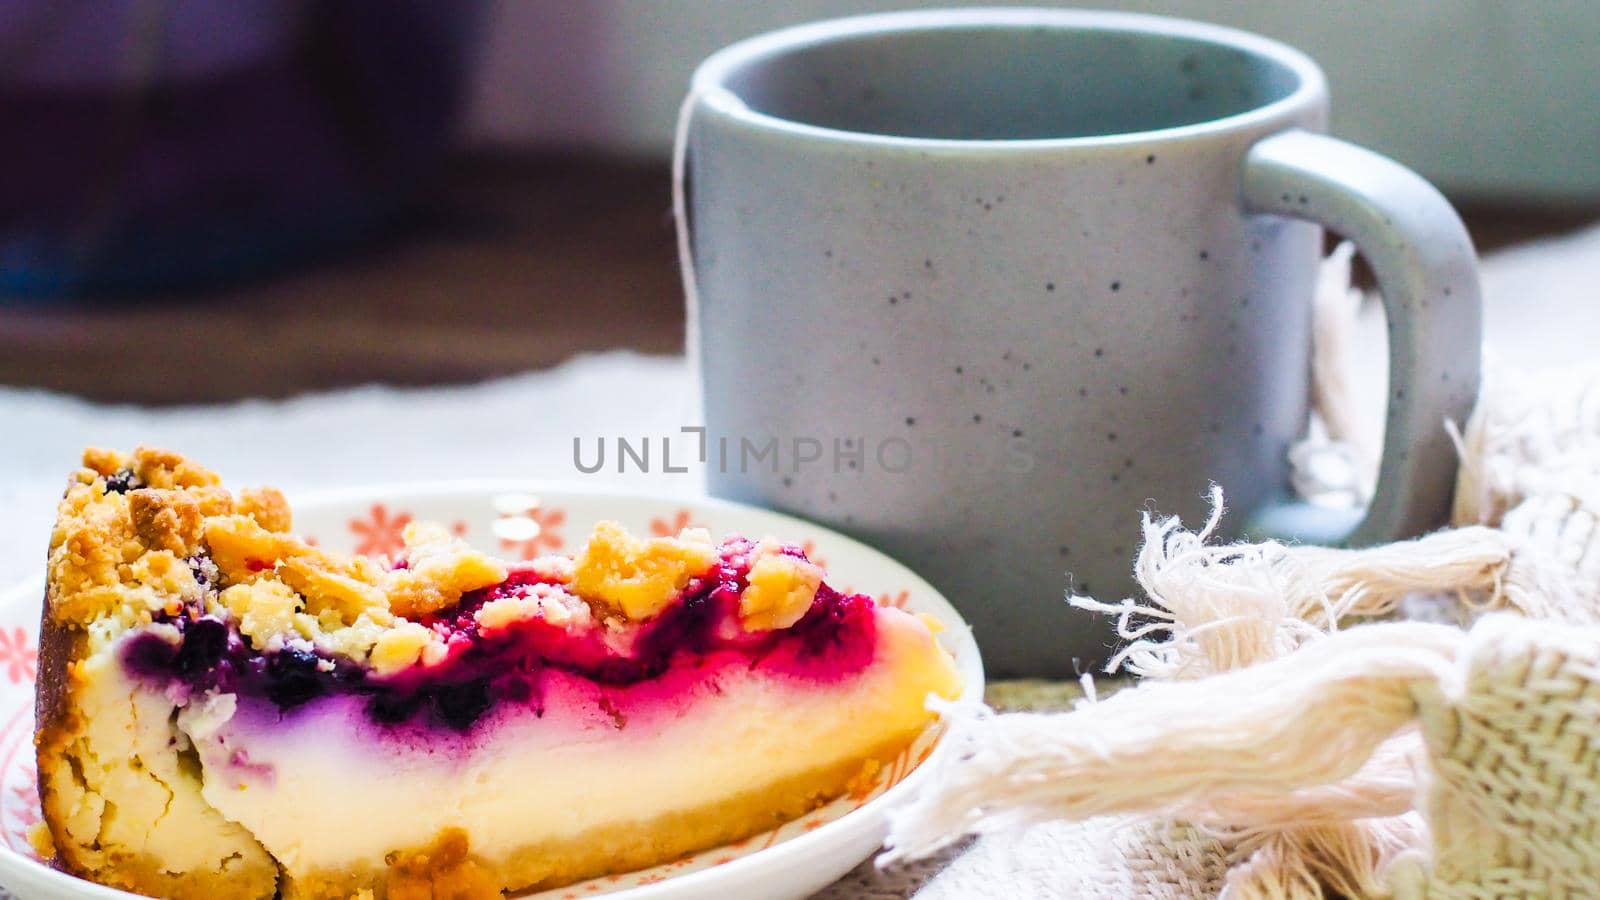 blueberry cheese cake on plate and a cup of coffee morning breakfast